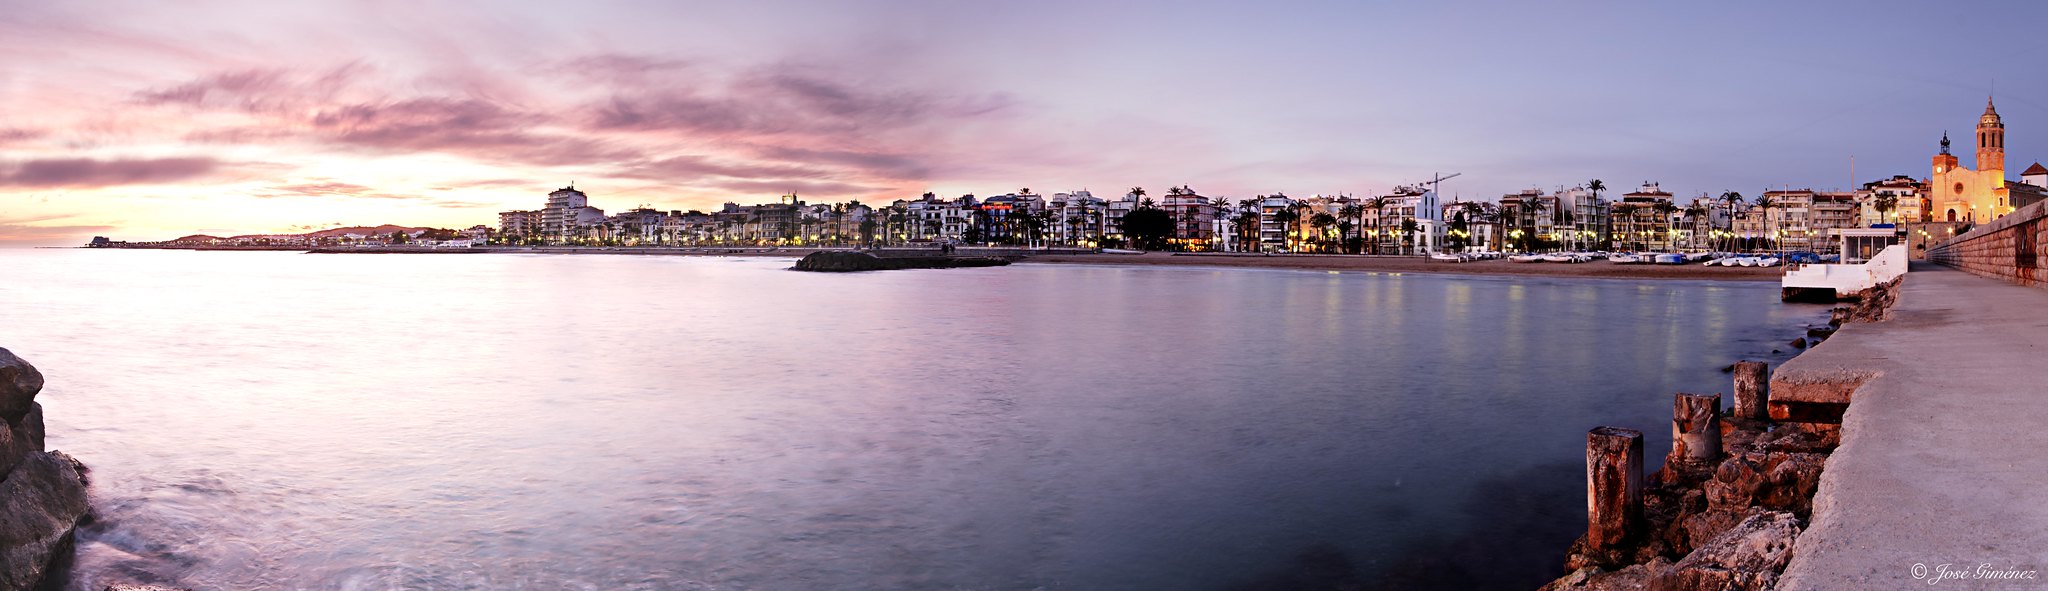 Sitges | Foto: Creativecommons.org